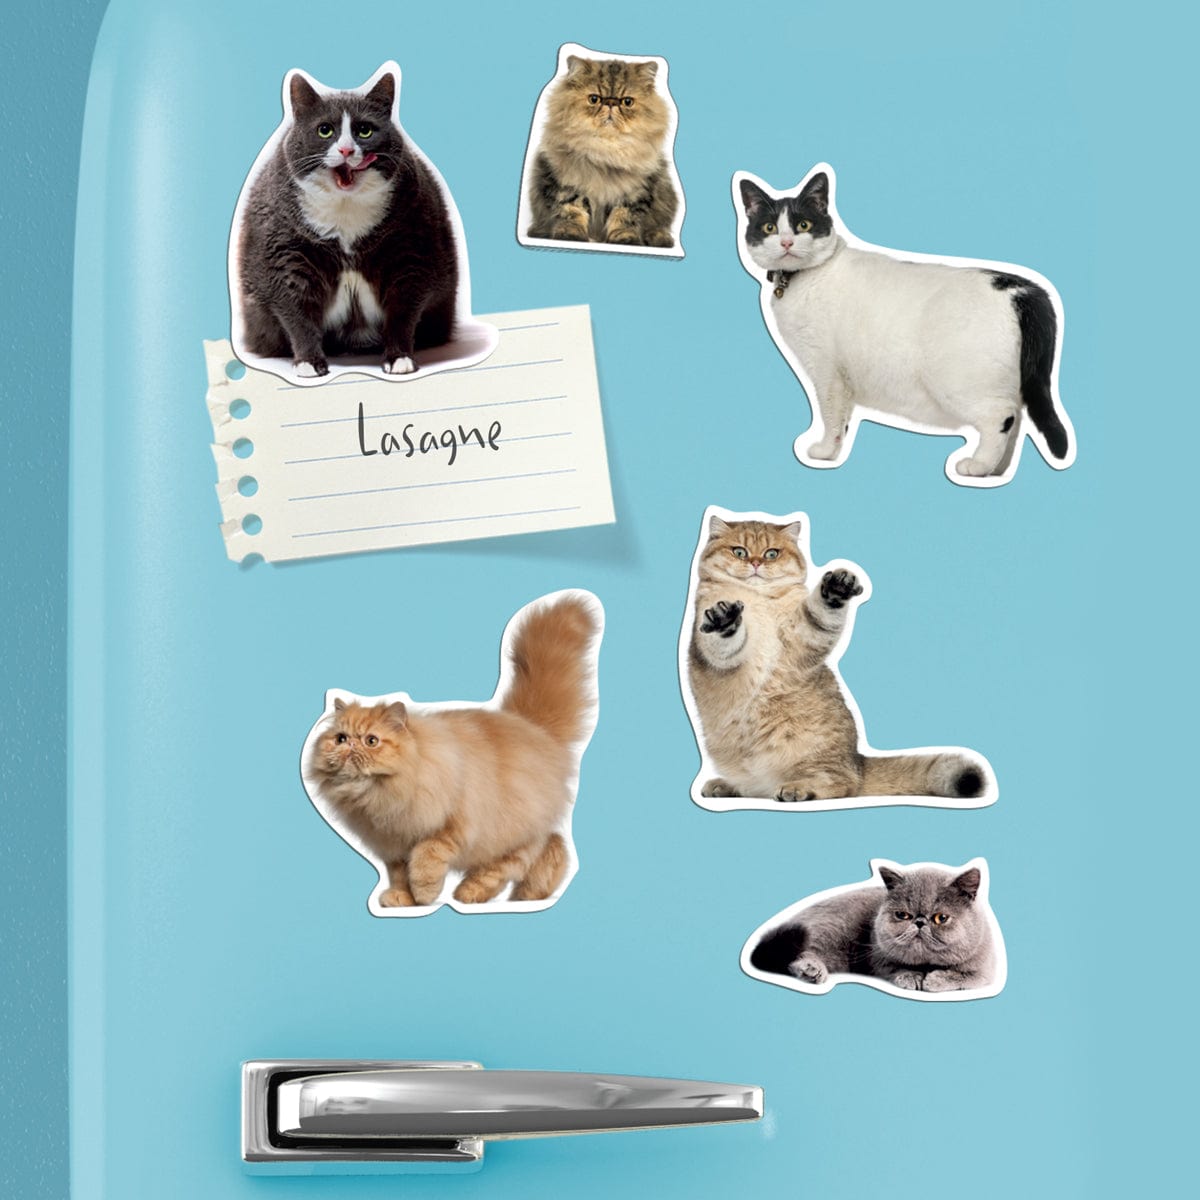 TIGC The Inappropriate Gift Co Fat Cat magnets